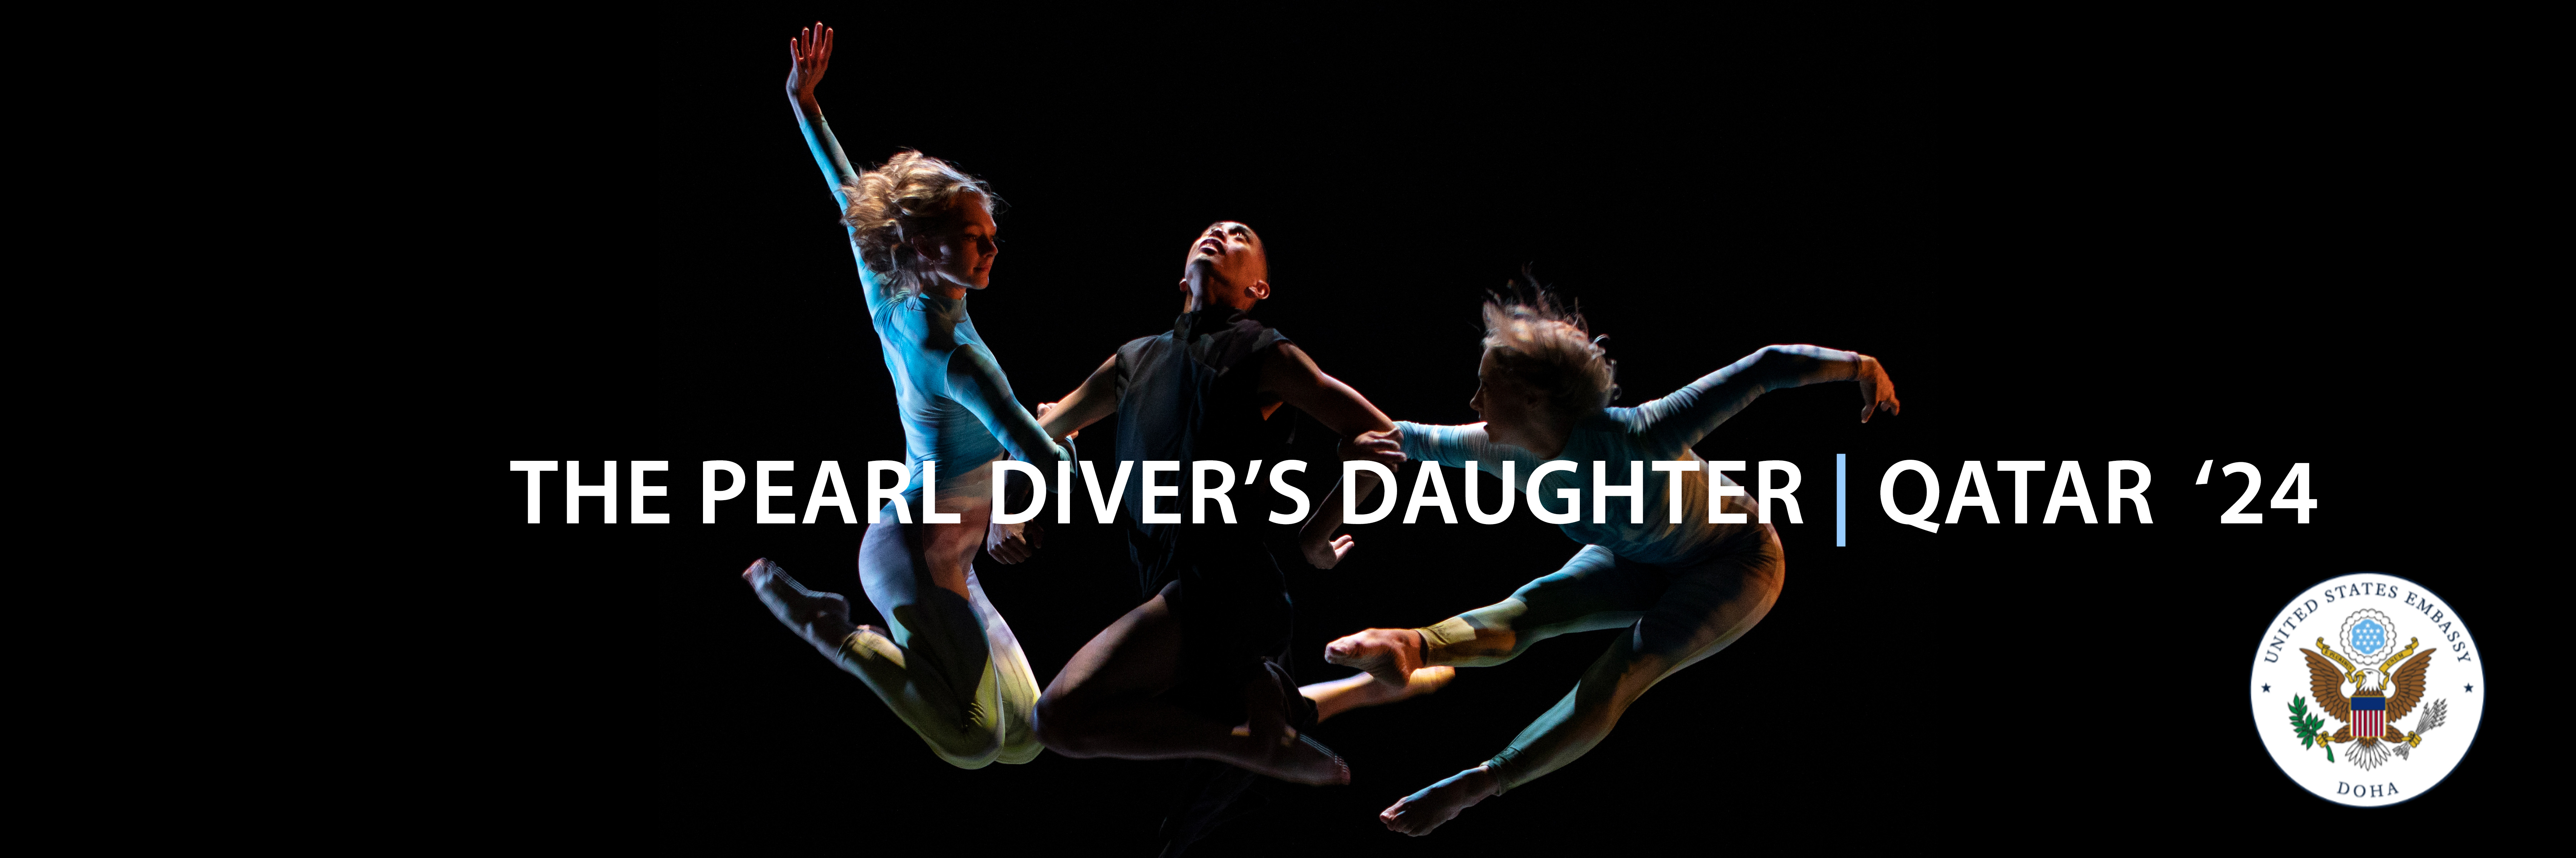 The Pearl Diver's Daughter - Qatar